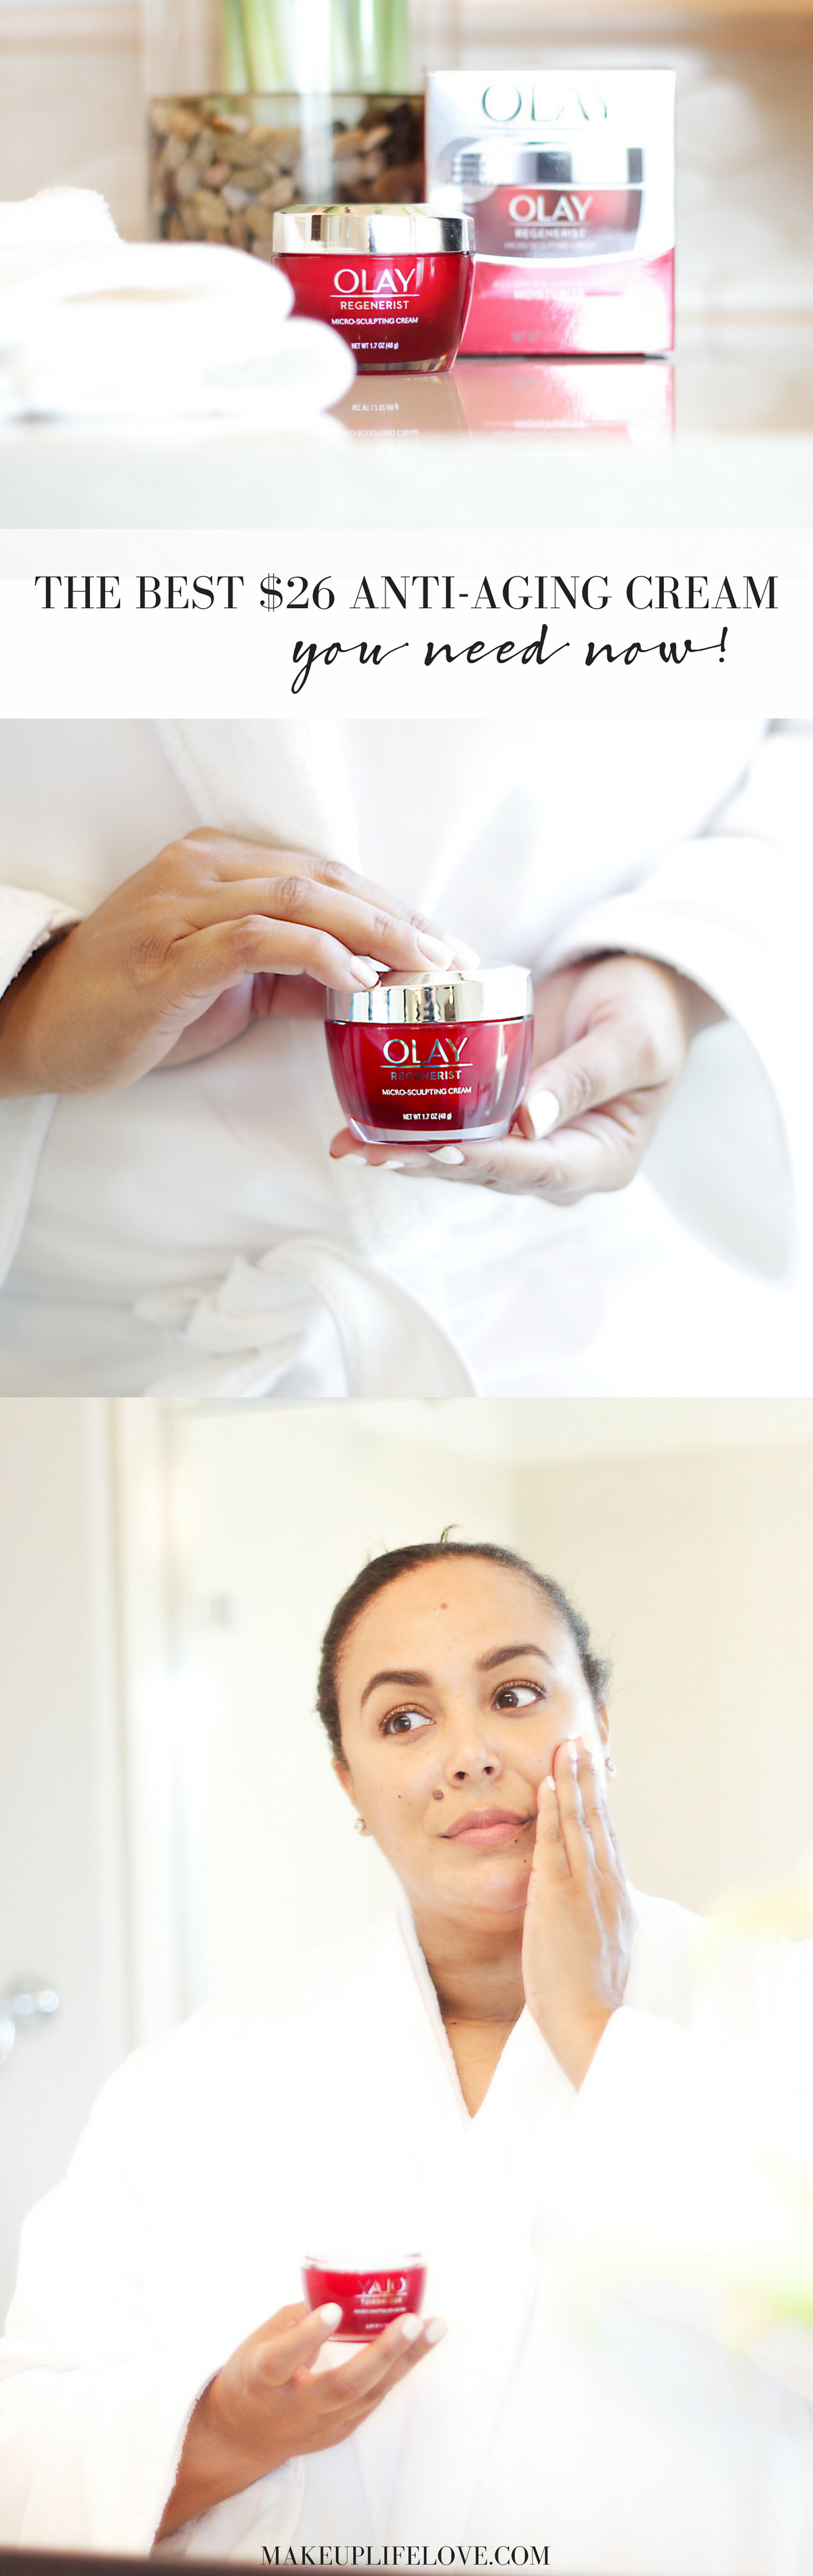 On the quest for younger looking skin? No worries, check out my top seven tips of anti-aging secrets + the best anti-aging cream EVER under $26!